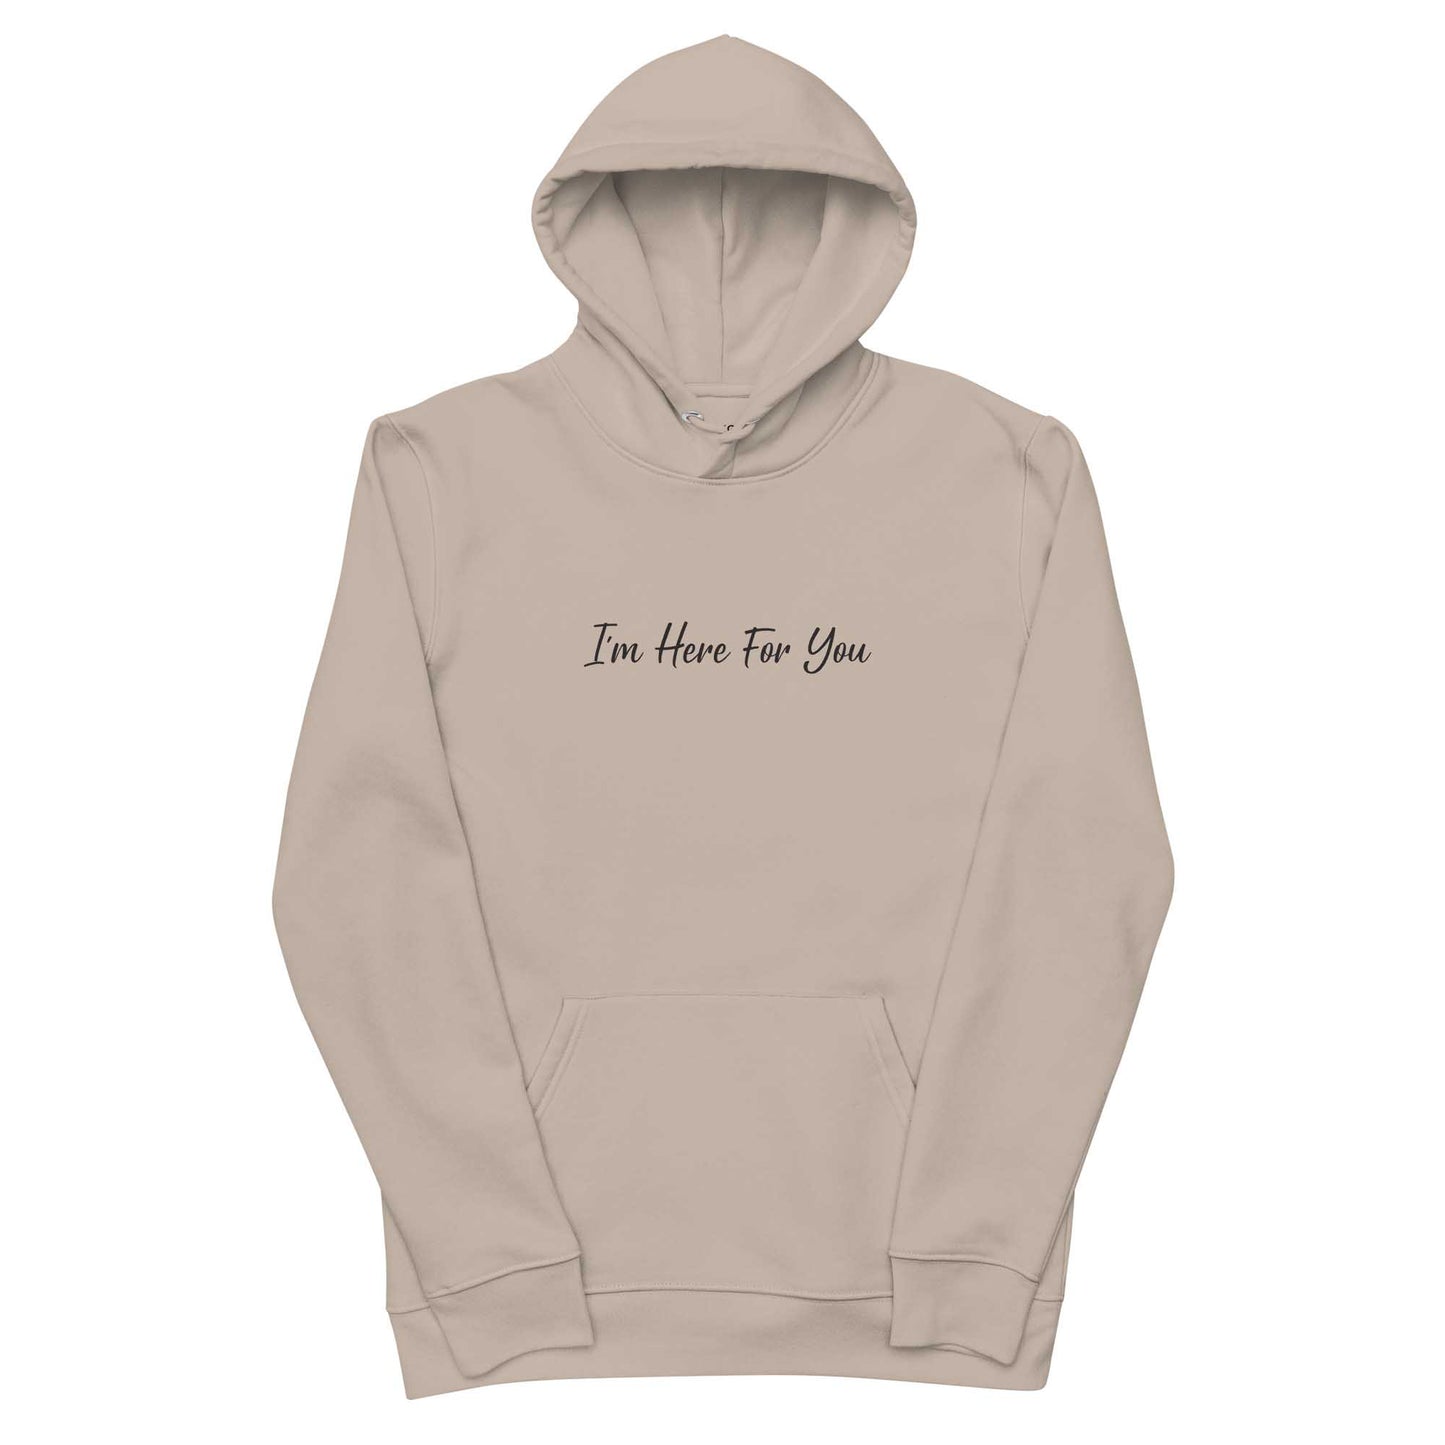 Men beige ethical hoodie with inspirational quote, "I'm Here For You."